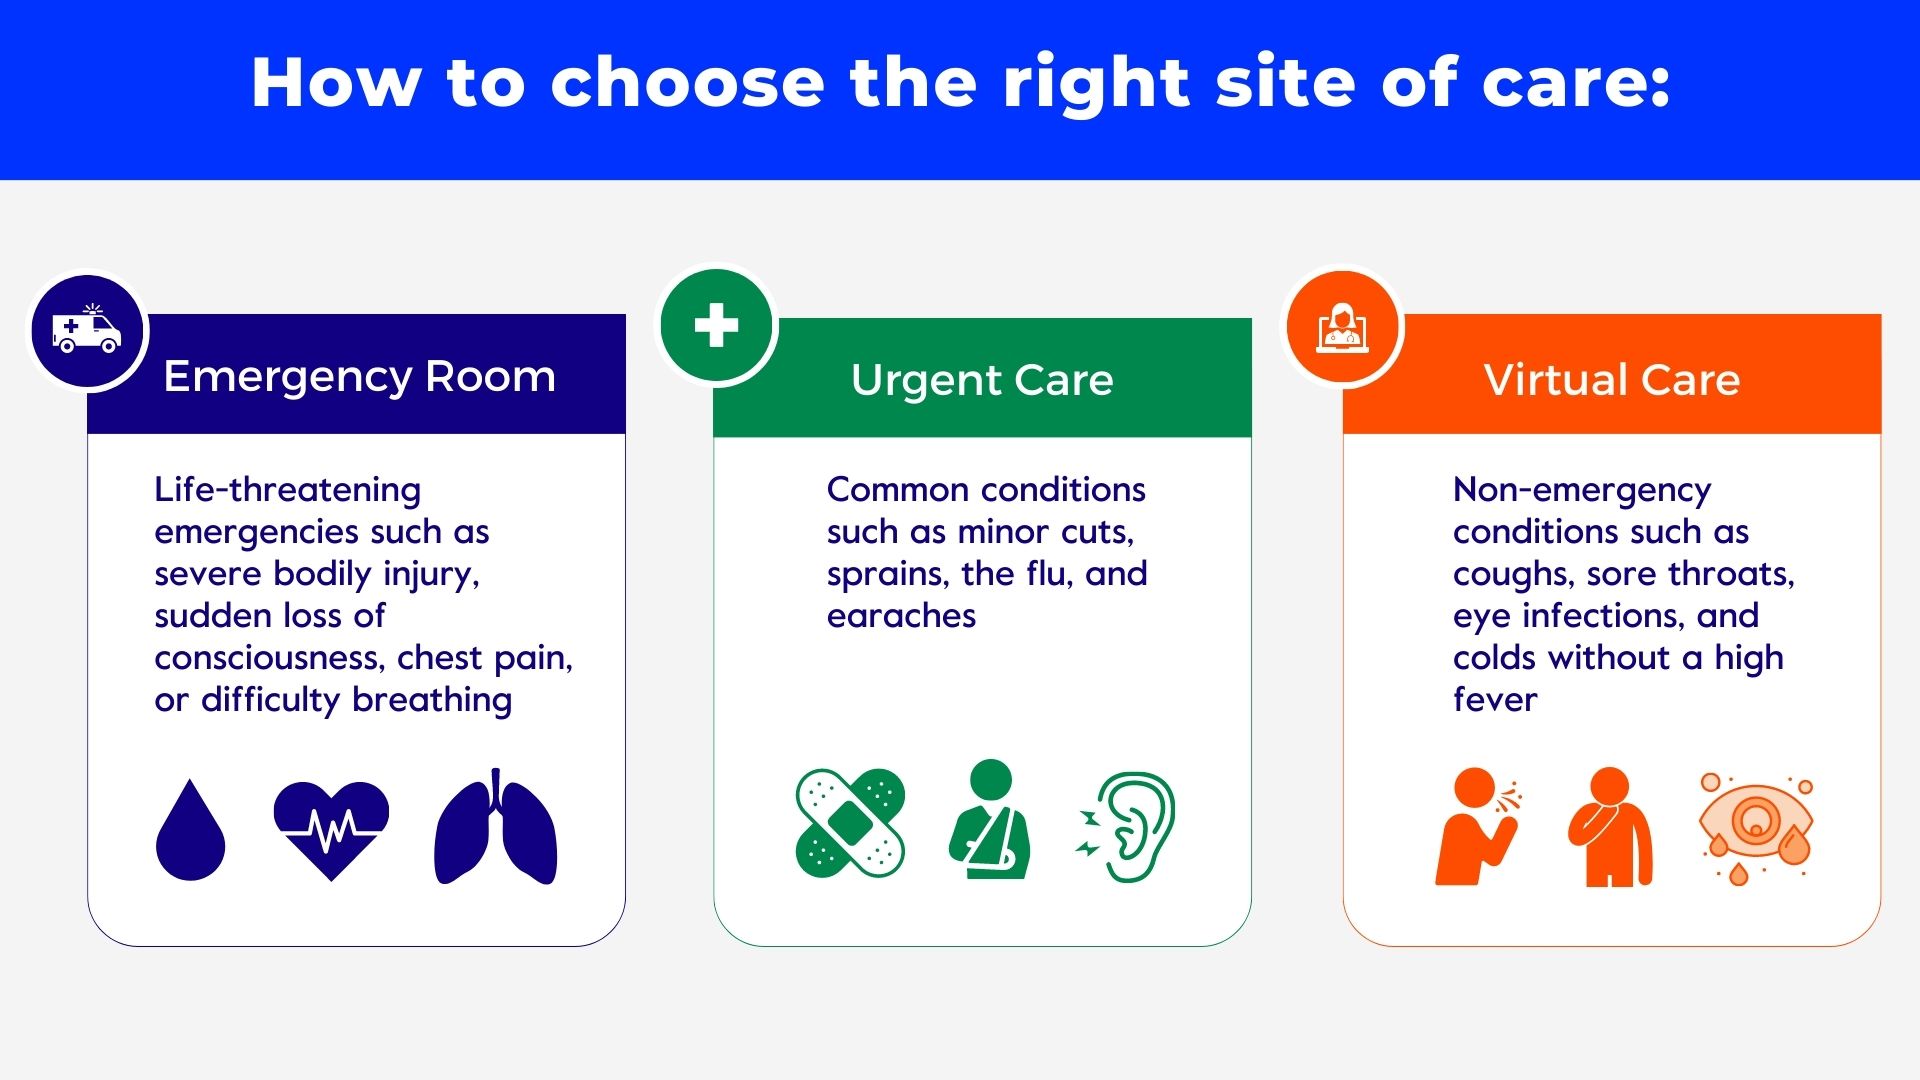 how to decide the right site of care between the emergency room, urgent care or virtual care